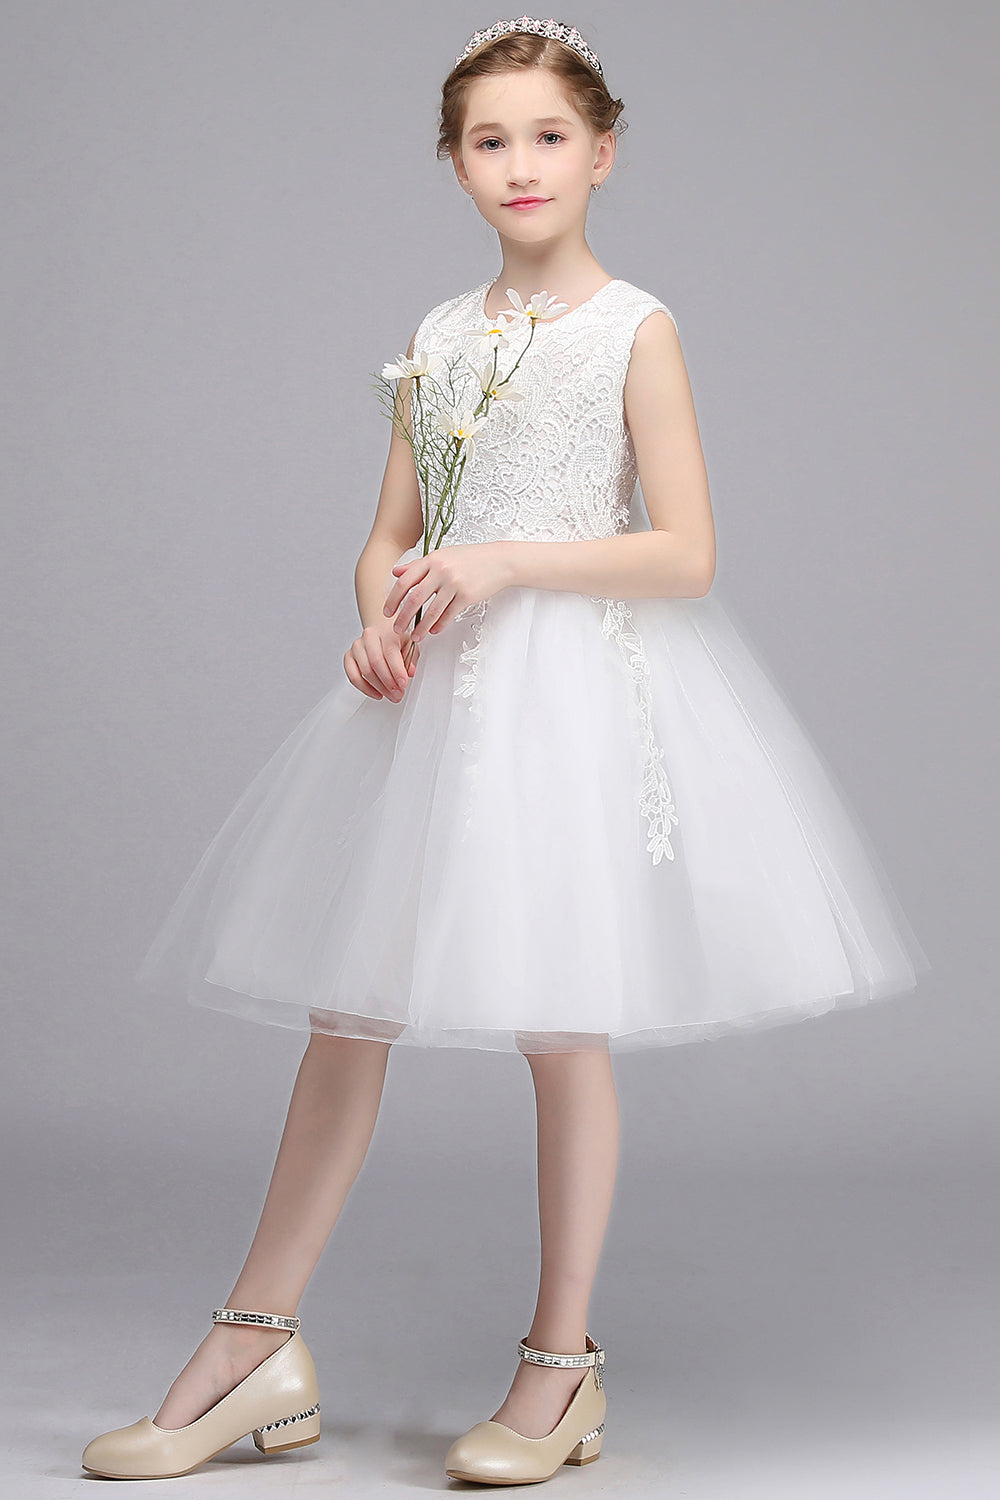 Toddler and Little Girls Flower Girls Dresses with Sweet Big Bow